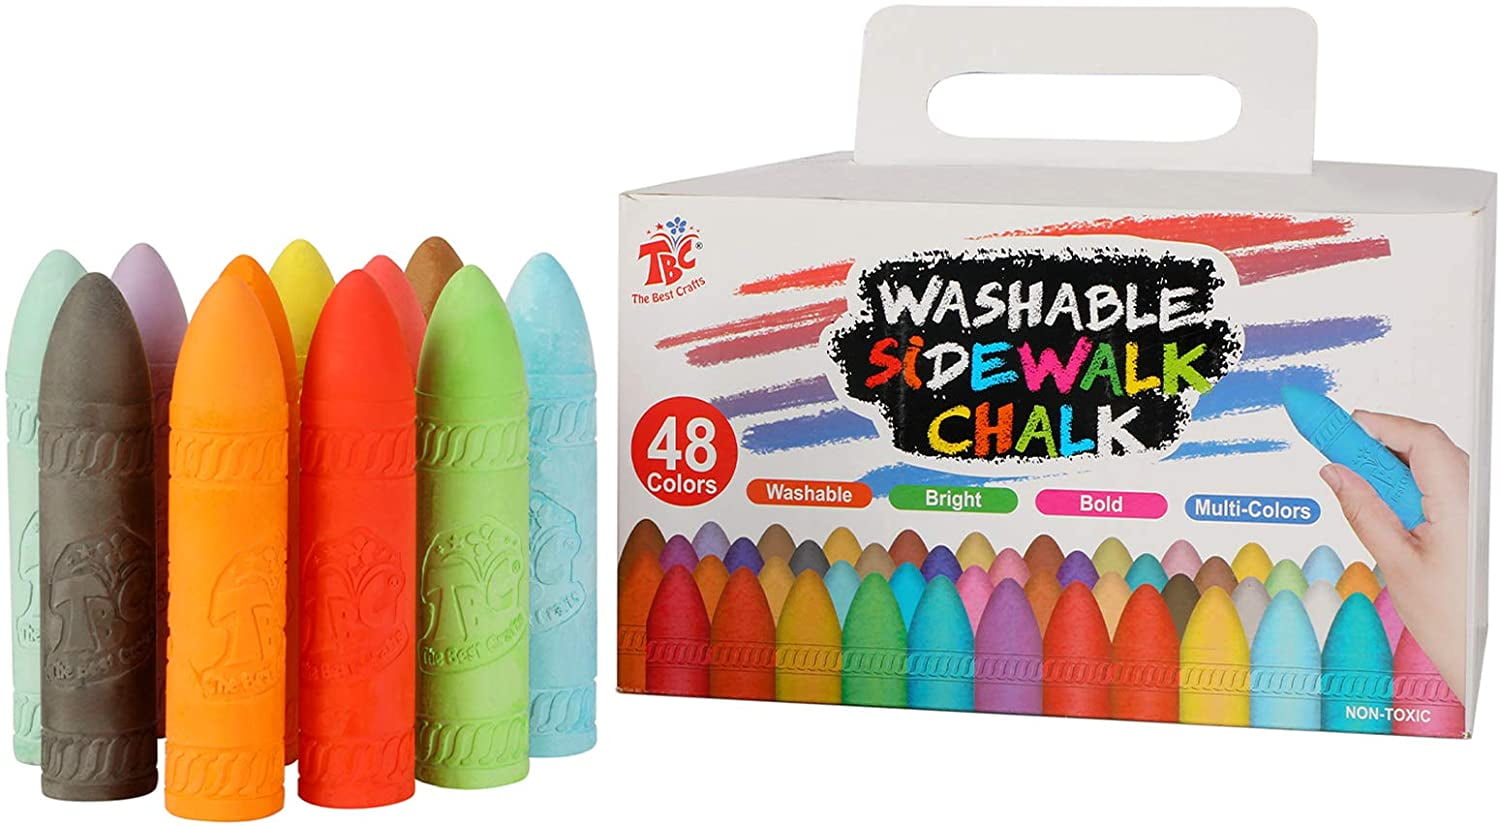 Crayola Washable Sidewalk Chalk 48 Different Bright & Bold Colors FAST SHIPPING! 